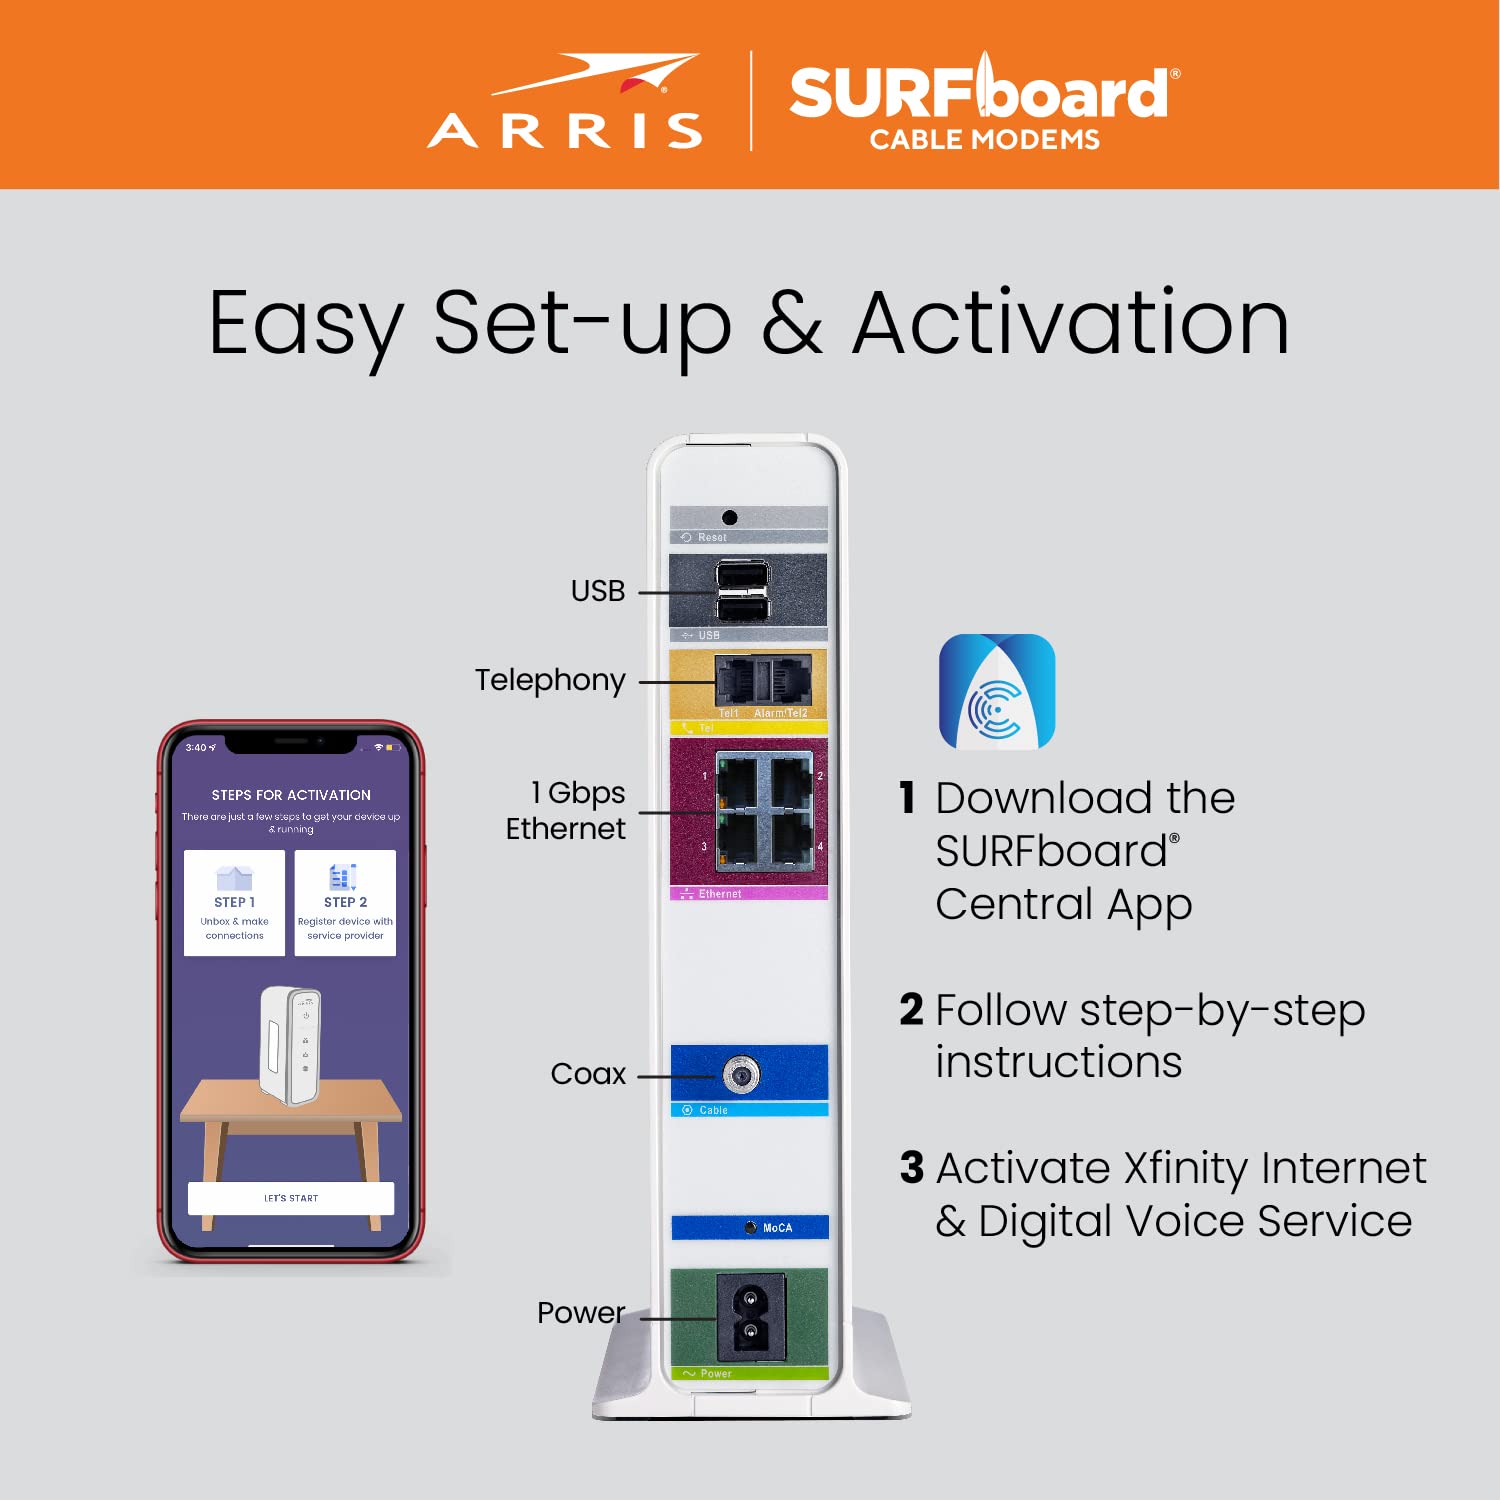 ARRIS SURFboard SVG2482AC DOCSIS 3.0 Cable Modem & AC2350 Wi-Fi Router | Comcast Xfinity Internet & Voice | Four 1 Gbps Ports | 2 Telephony Ports for Digital Voice | Up to 800 Mbps | 2 Year Warranty